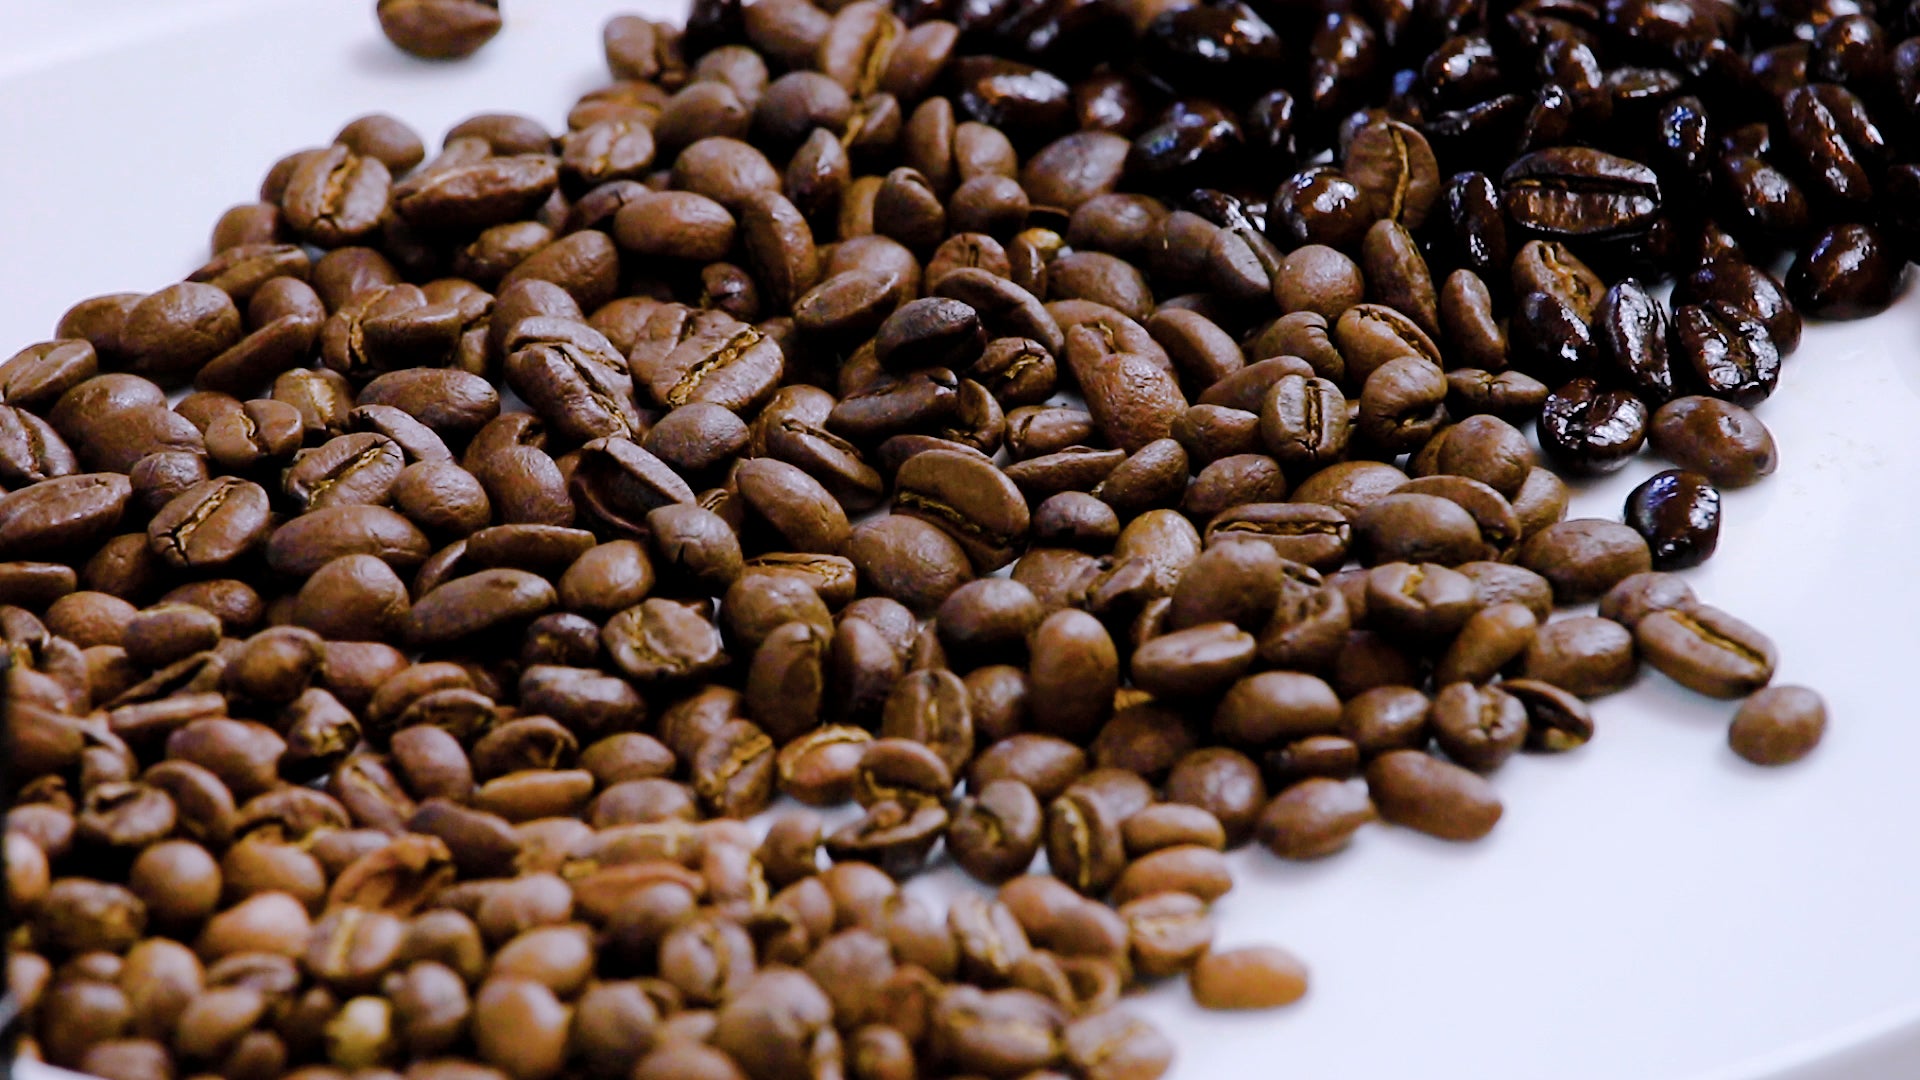 6 Easy Coffee Bean Recipes - What to do With Coffee Beans